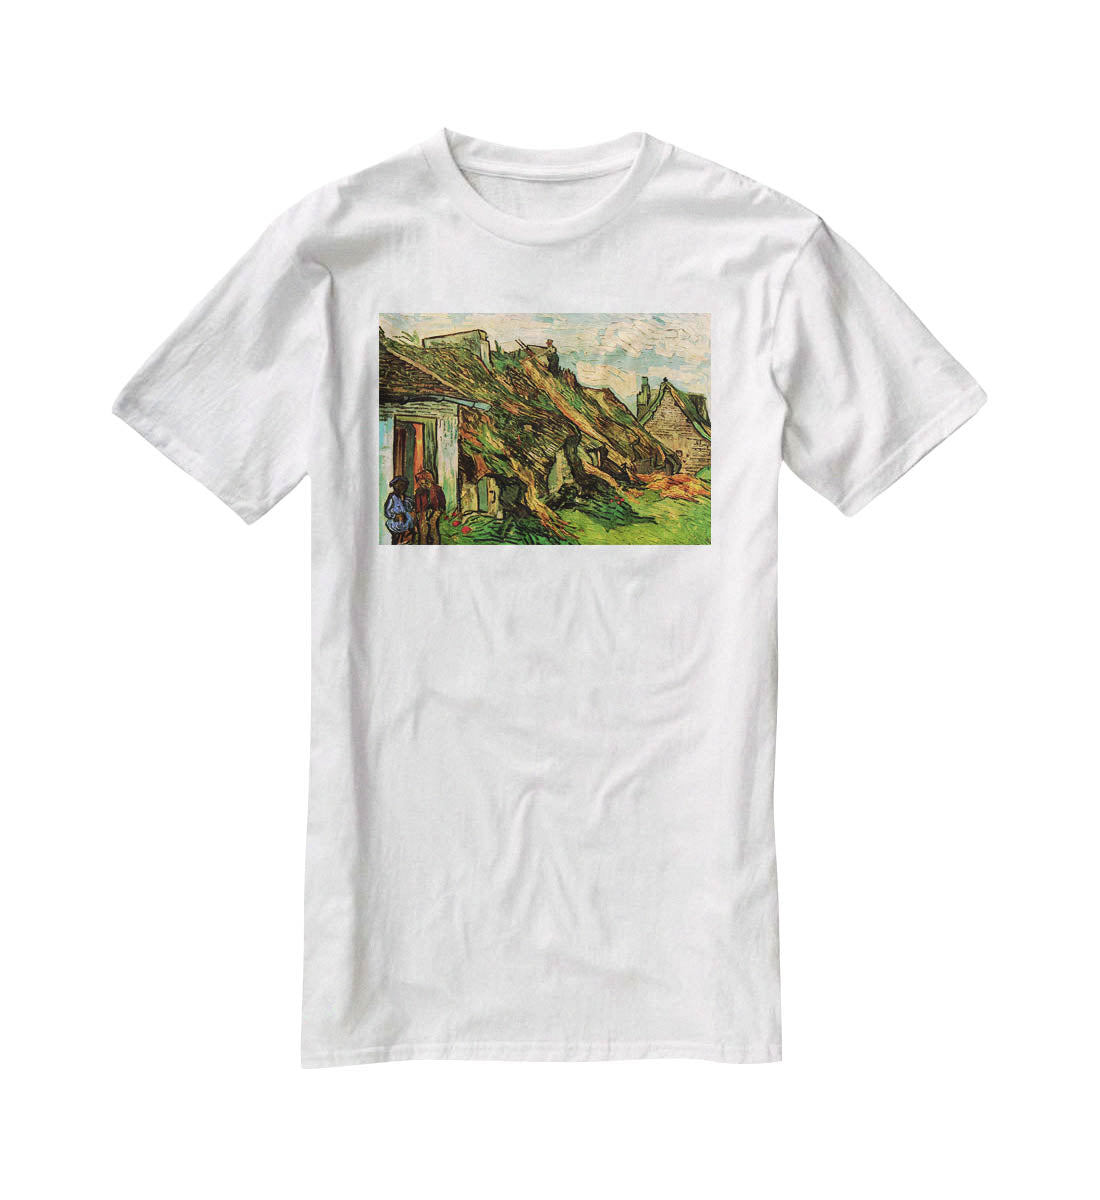 Thatched Sandstone Cottages in Chaponval by Van Gogh T-Shirt - Canvas Art Rocks - 5